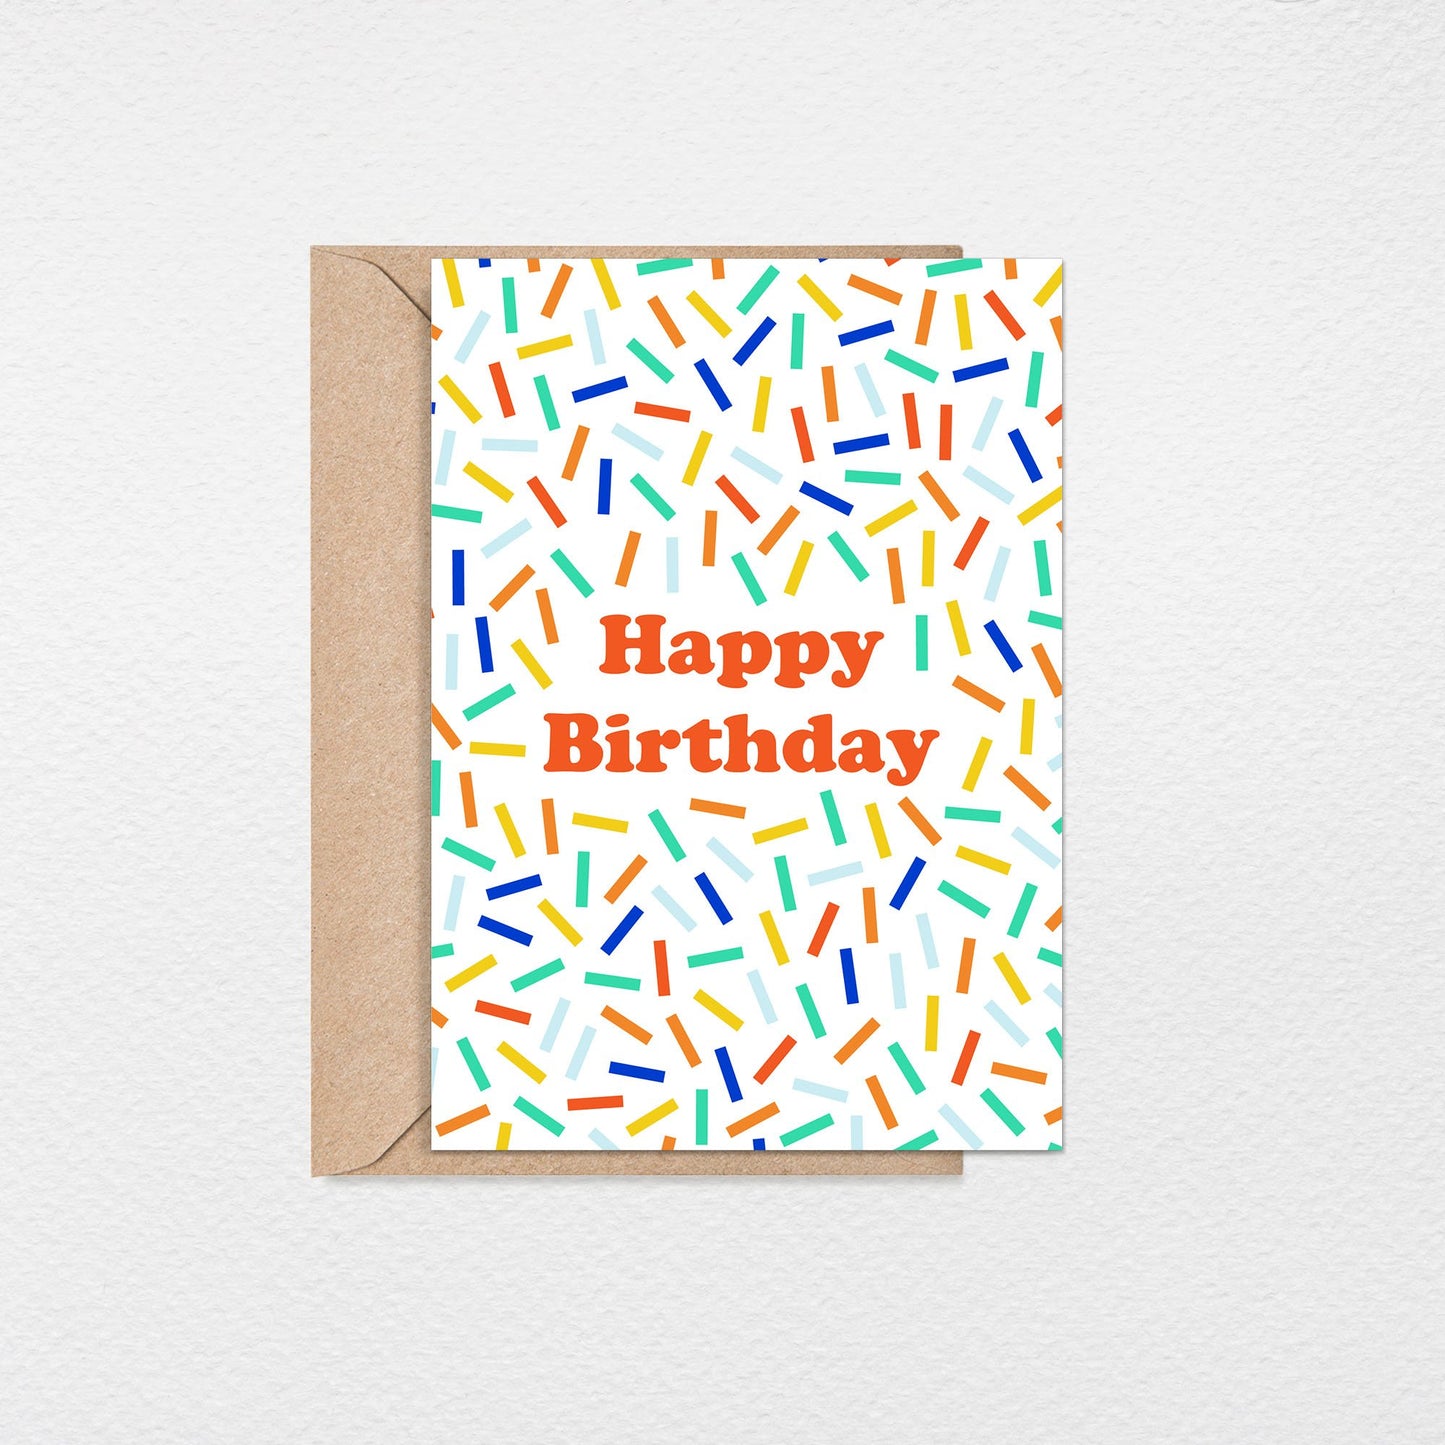 Birthday Confetti 5x7” greeting card from Goods Made By Digitrillnana, Ashley Fletcher. Colorful greeting card.